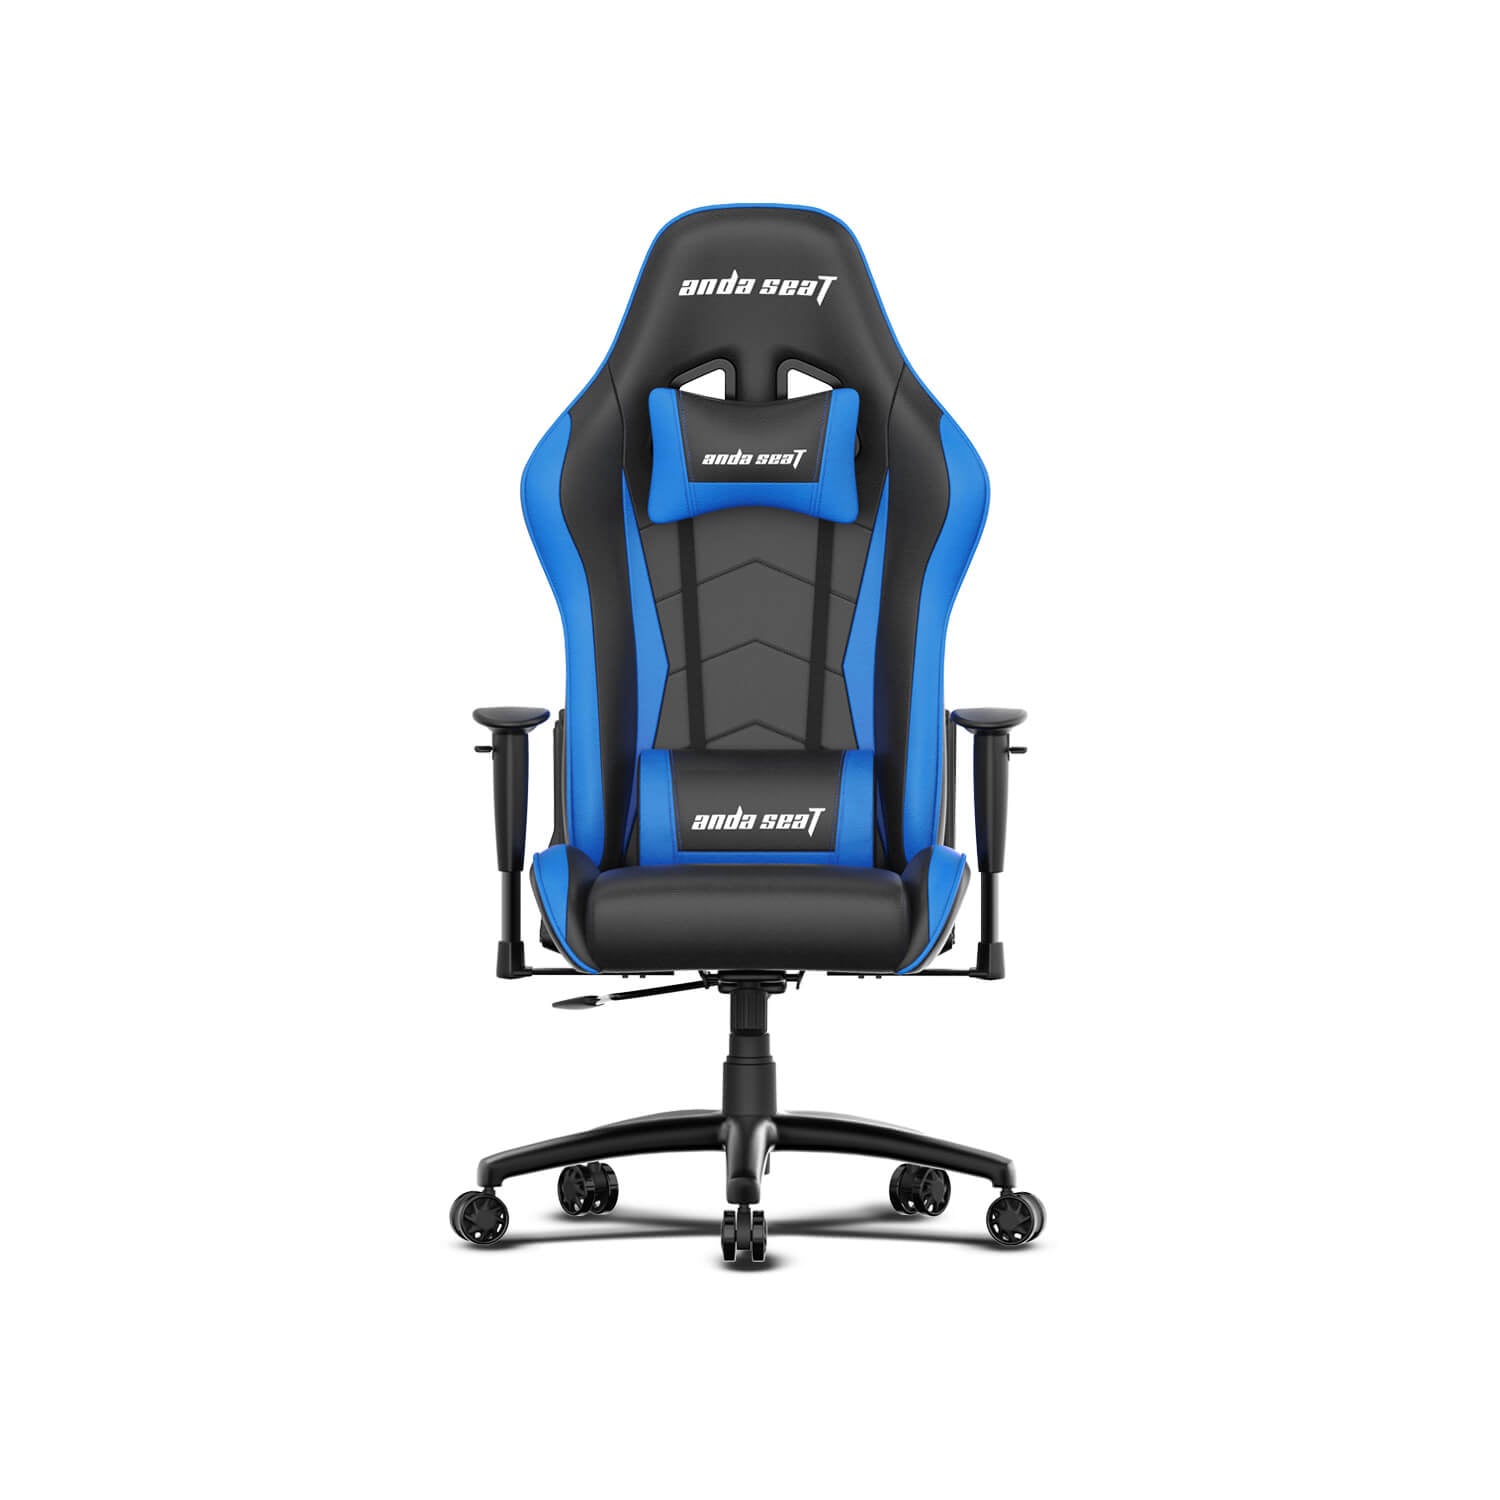 Anda Seat Axe Series Gaming Style Office Chair